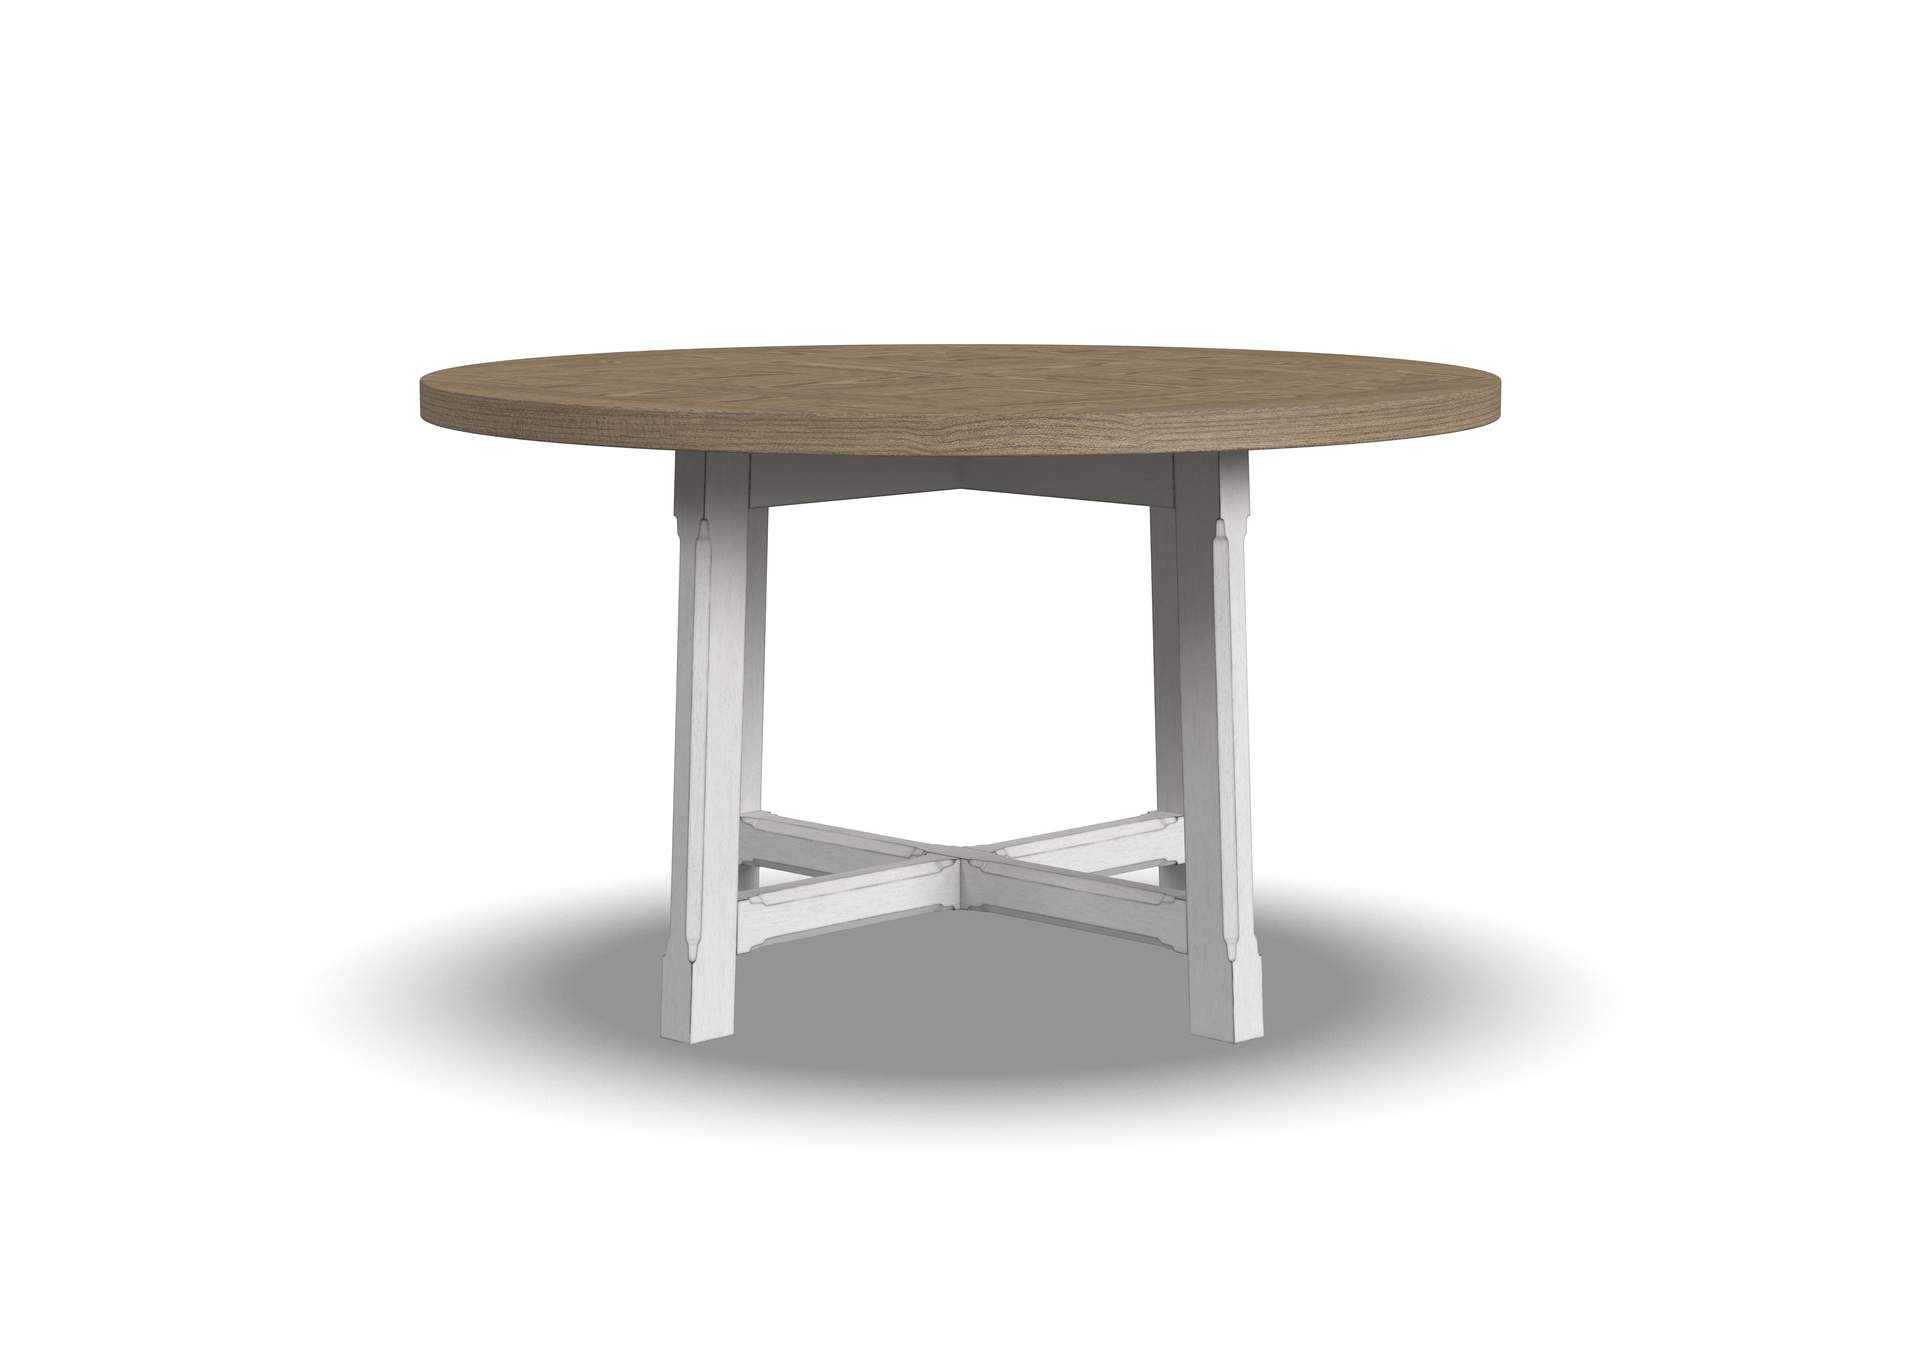 Melody Round Dining Table,Flexsteel